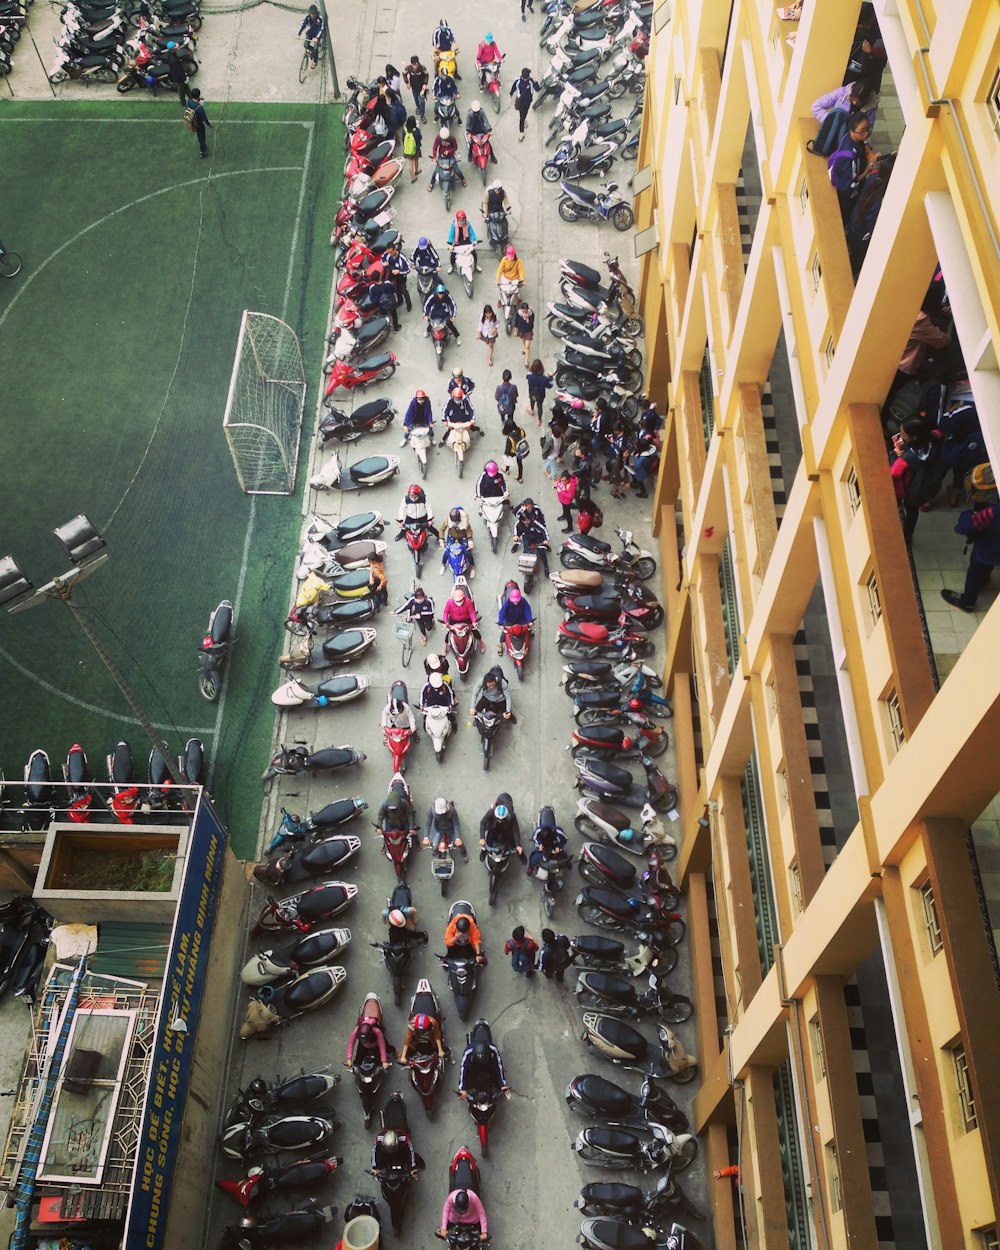 bird's-eye view photo of row of motorcycles on road